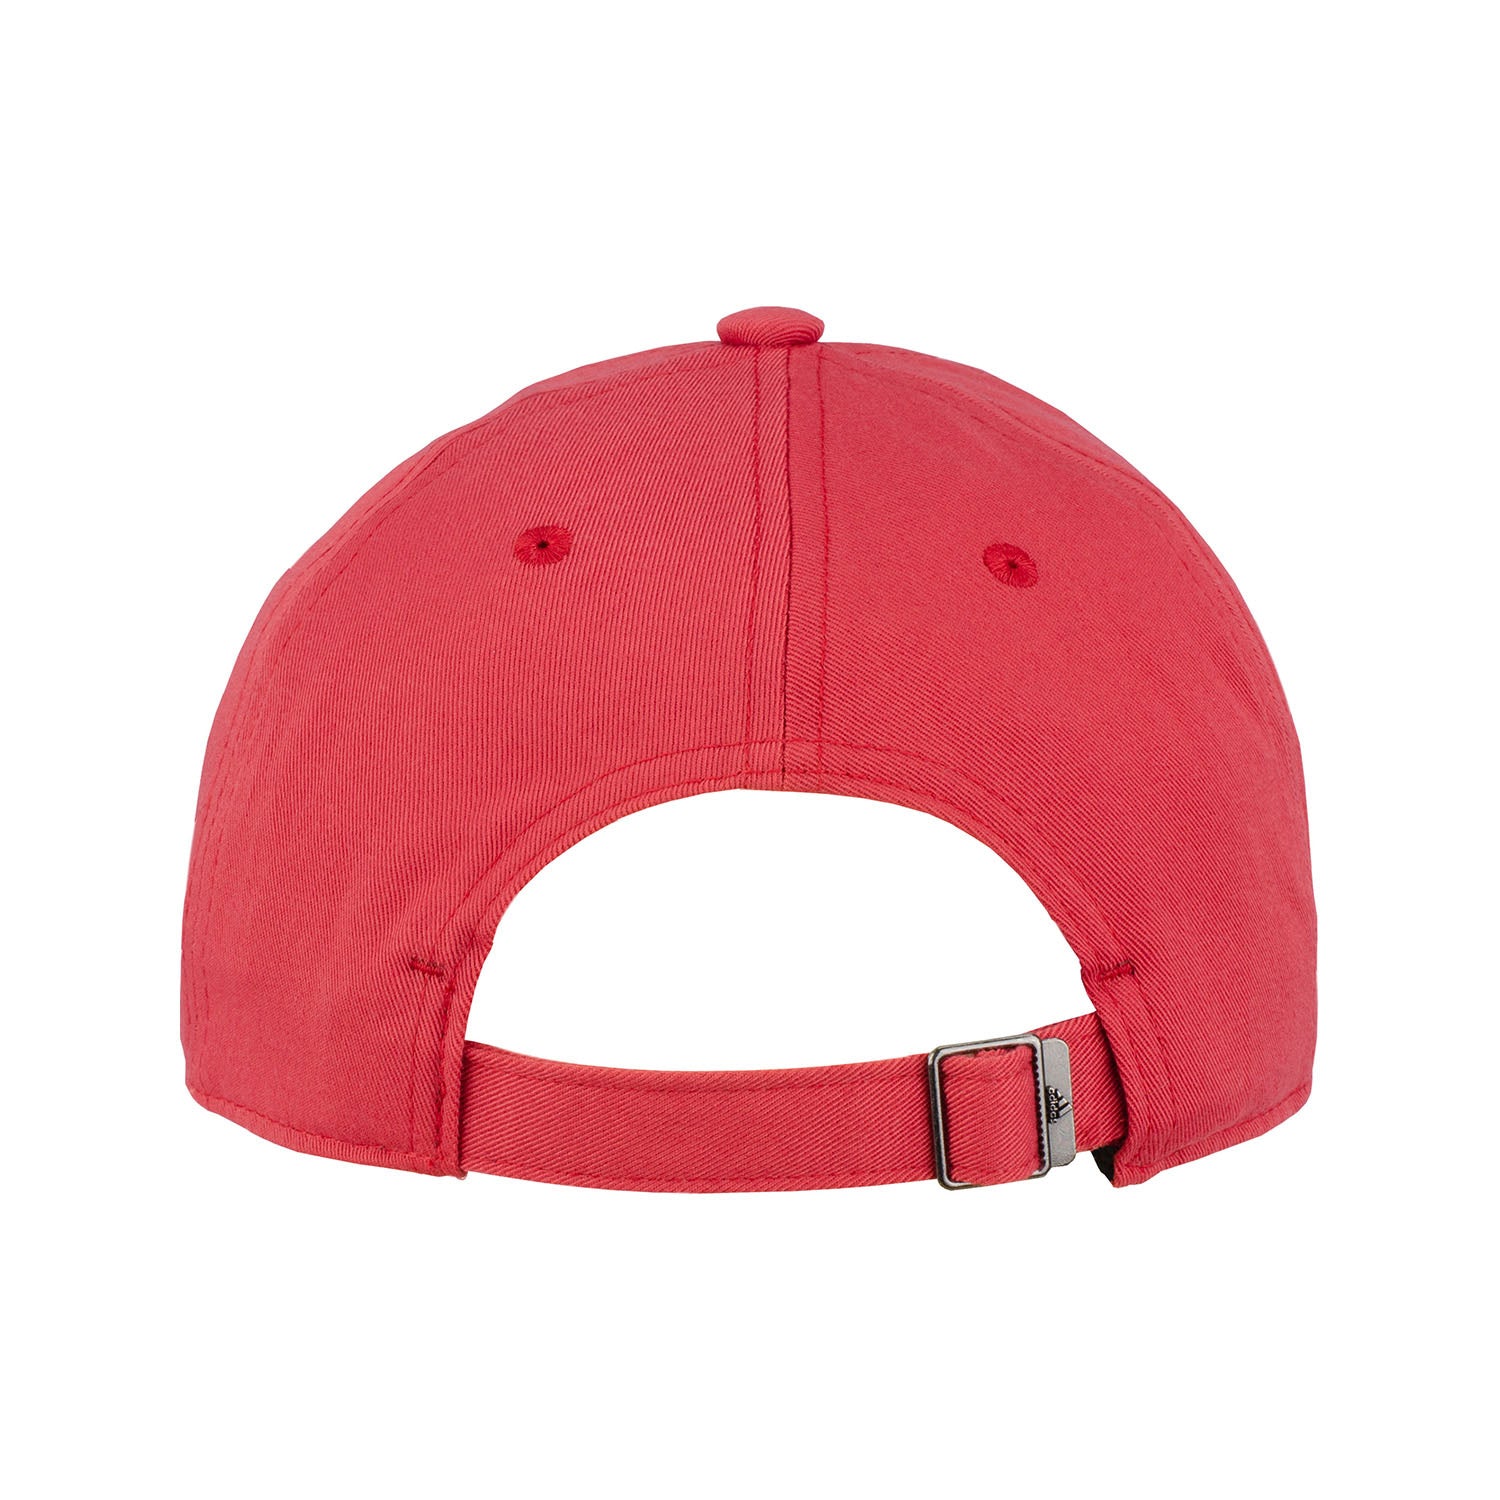 Indiana Hoosiers Adidas Performance Slouch Adjustable Hat - Official ...